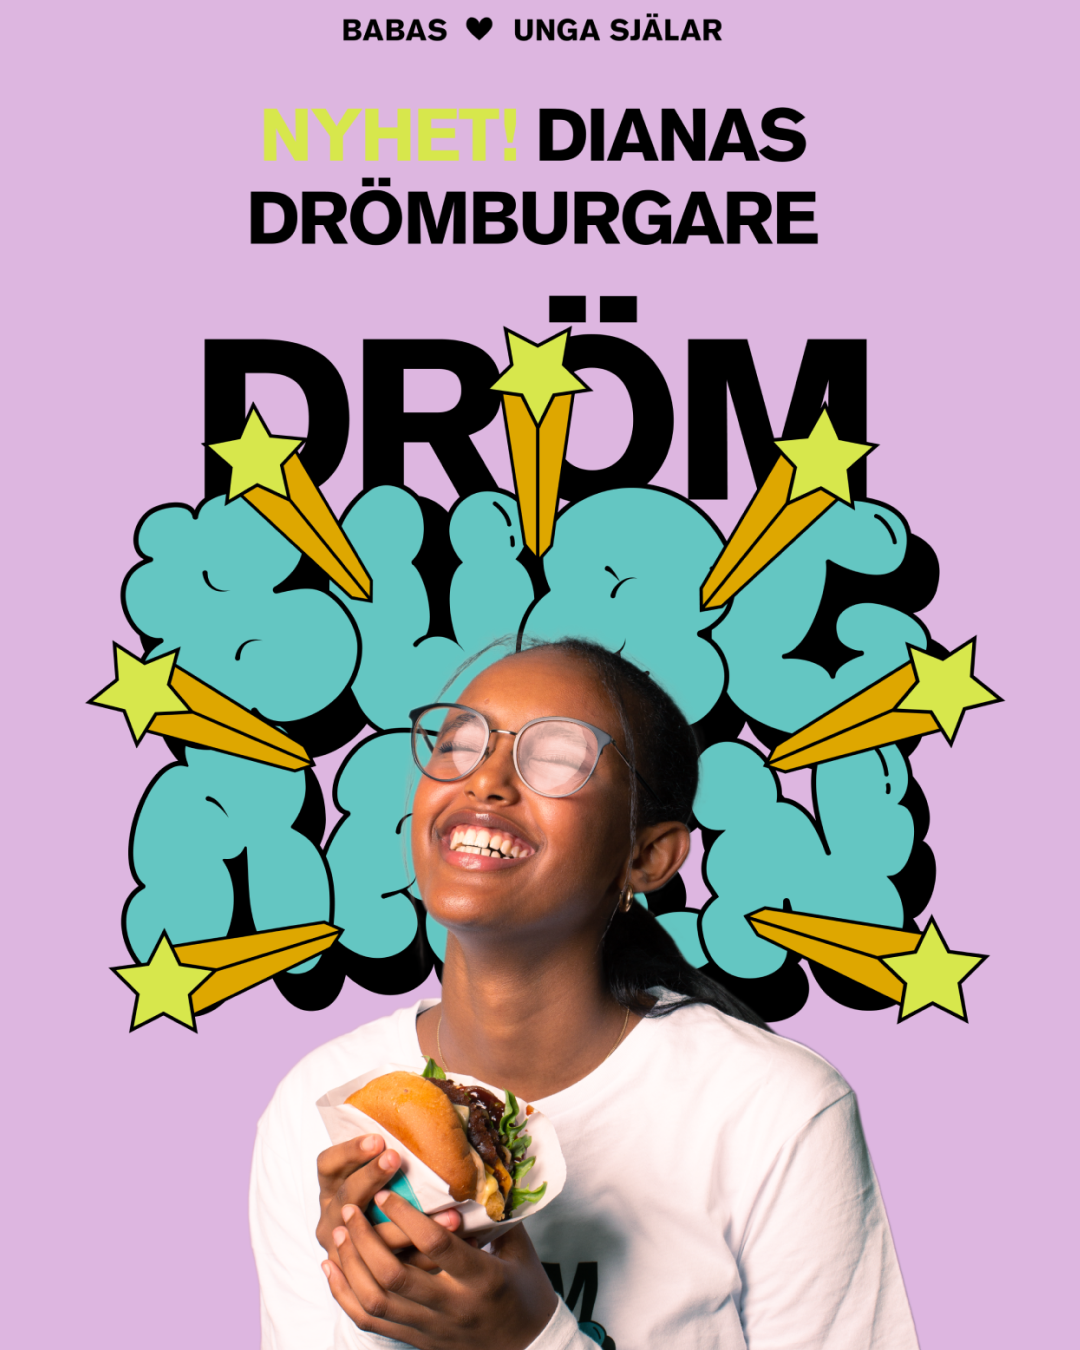 A poster with a girl on it who looks happy and is holding the Babas DreamBurger.